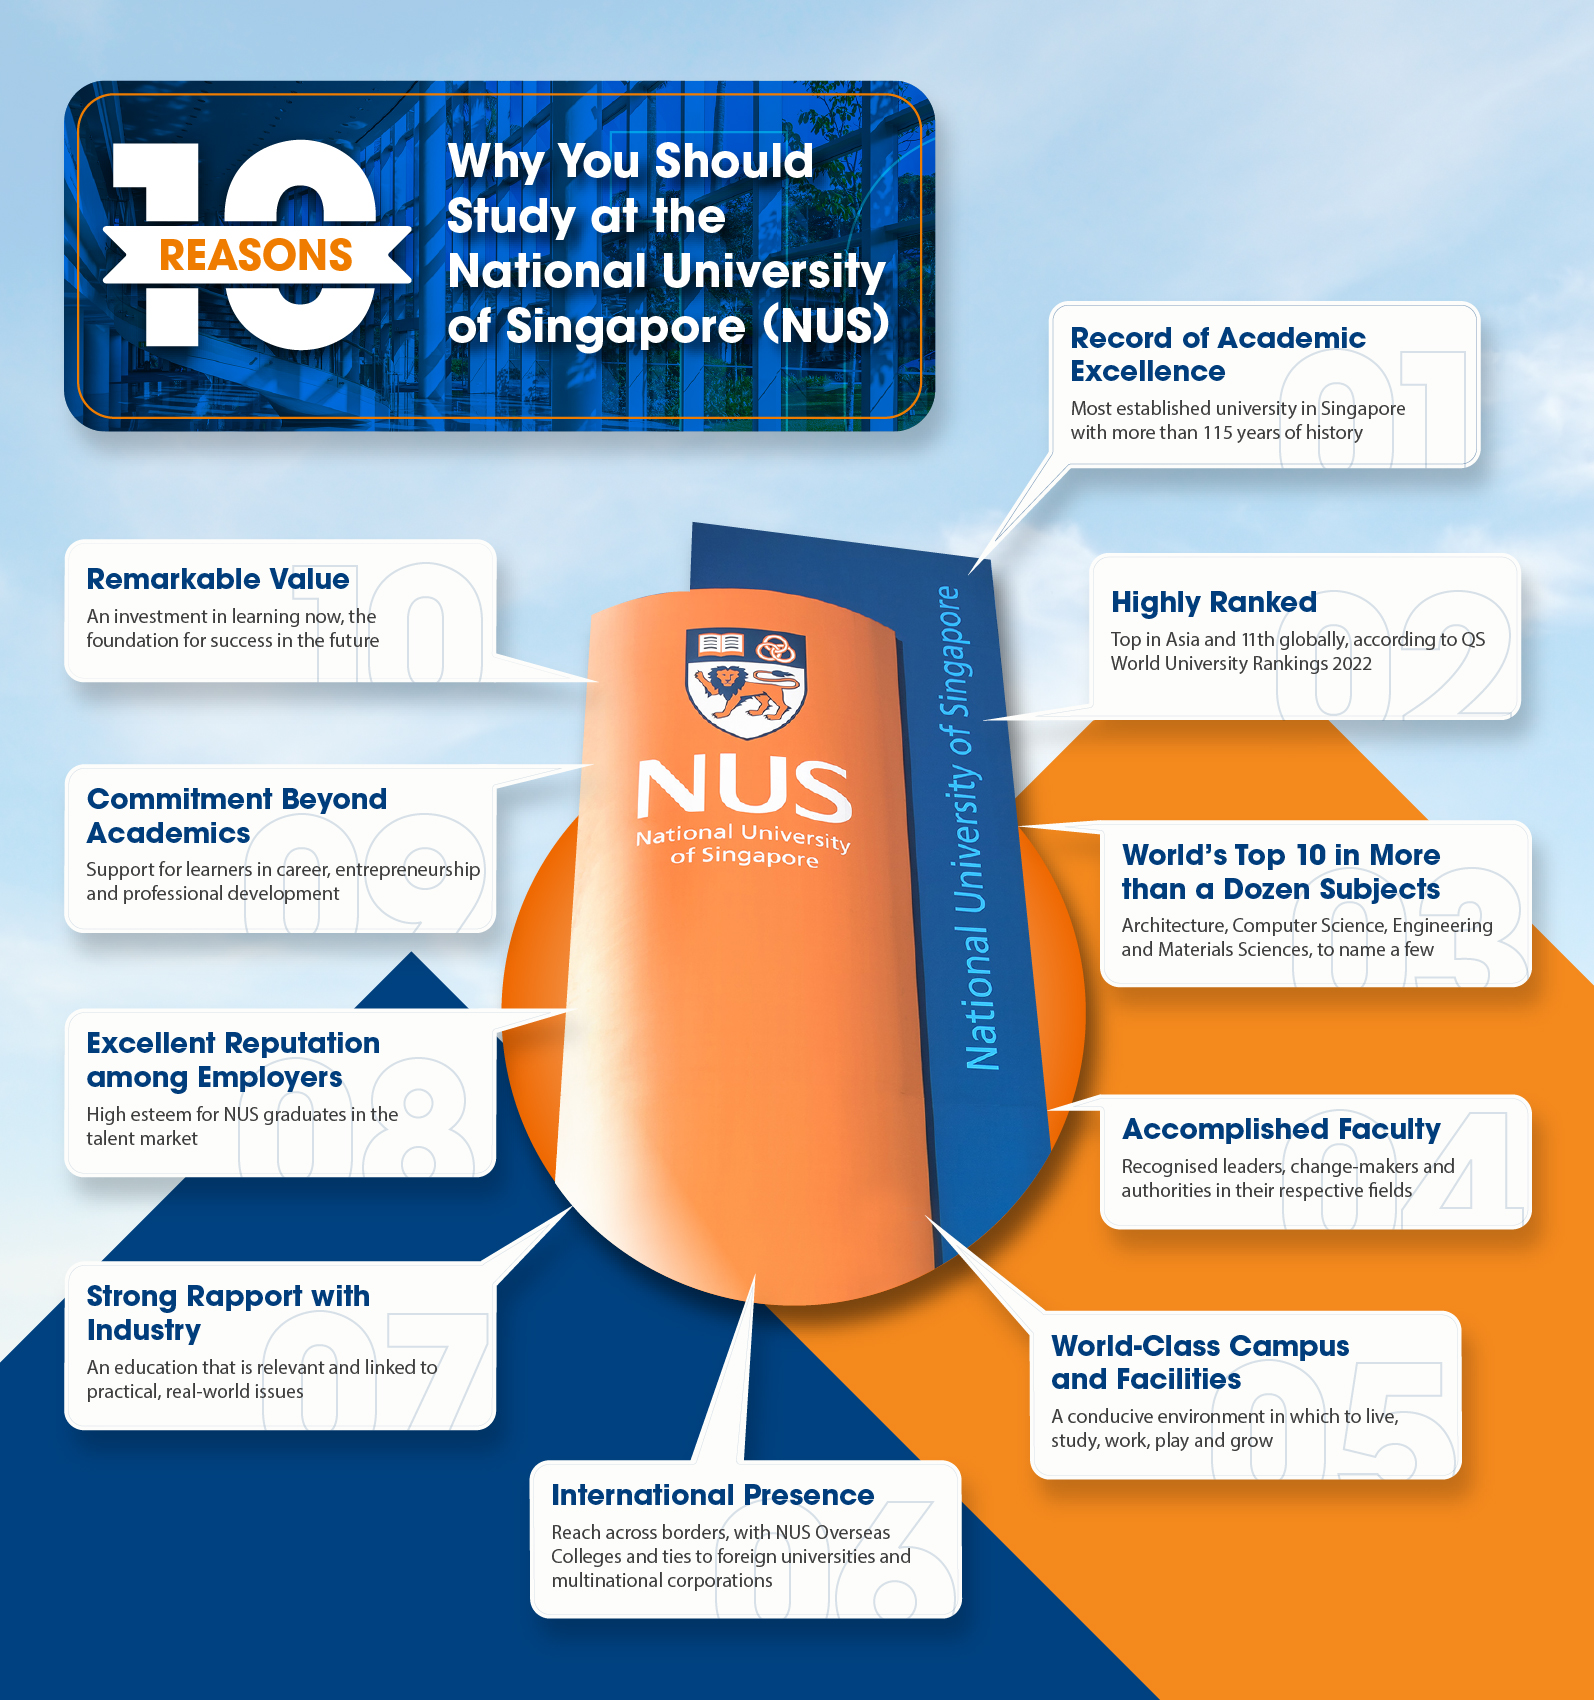 Why you should study at NUS?